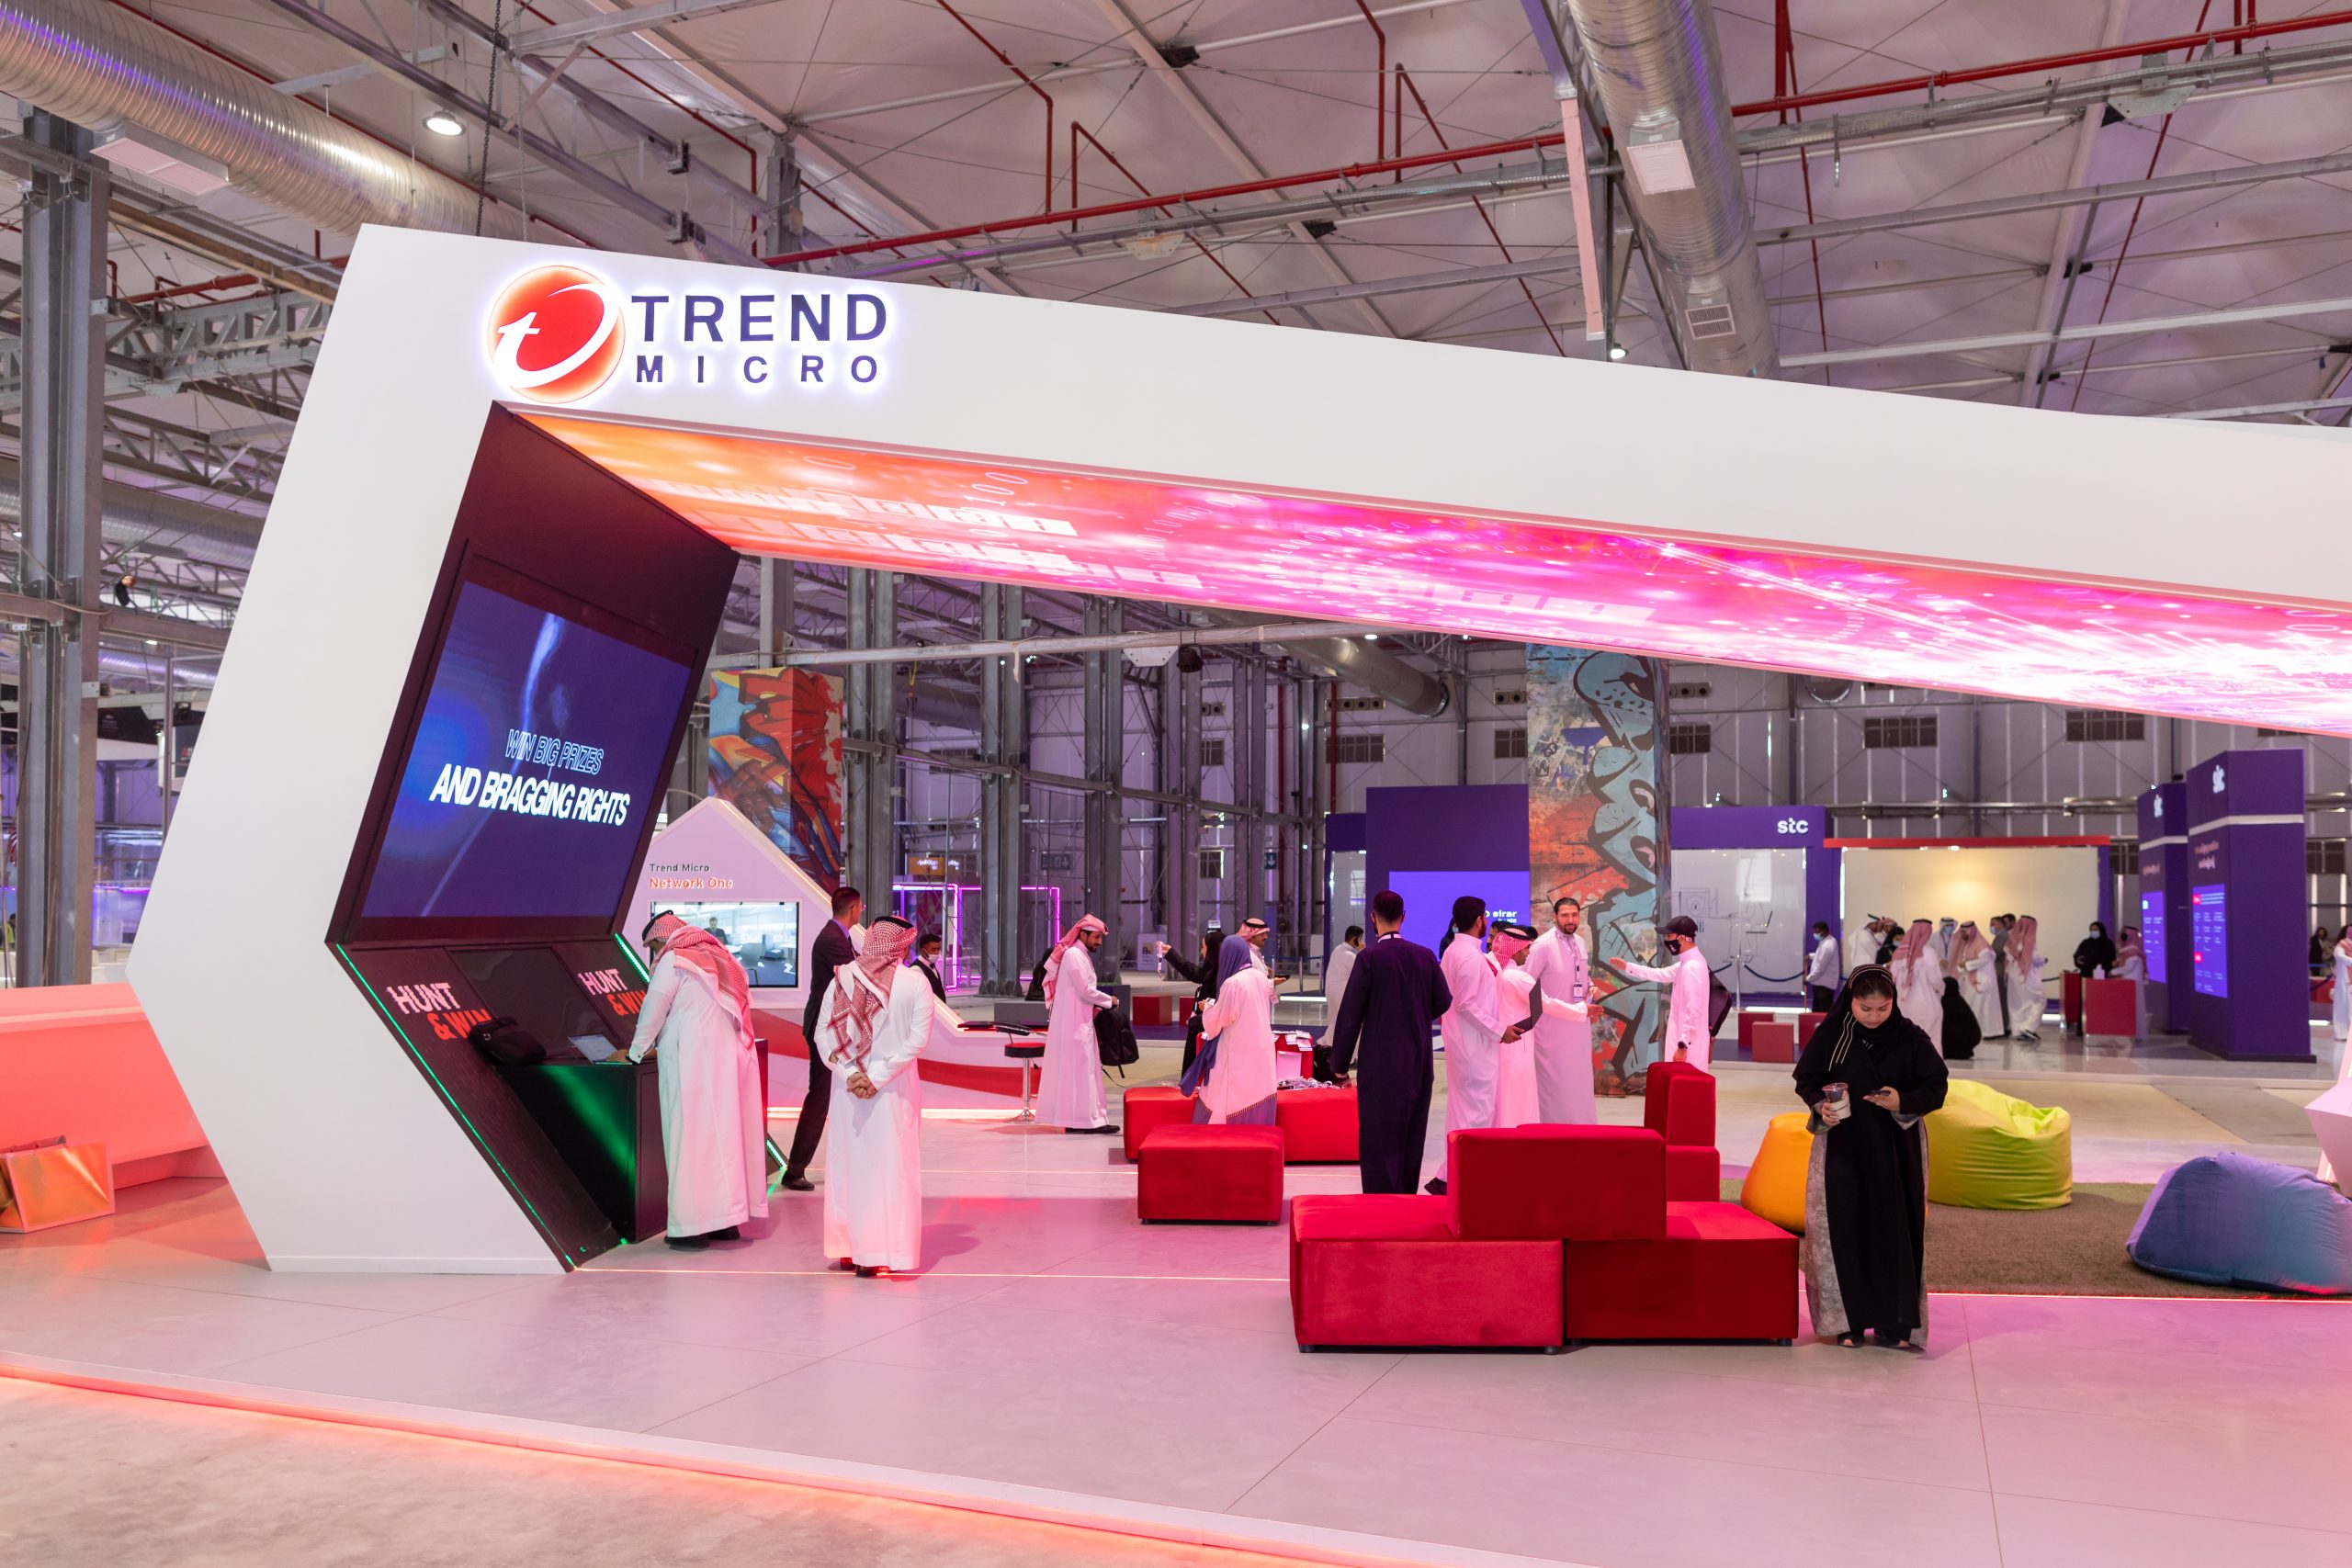 Trend Micro booth